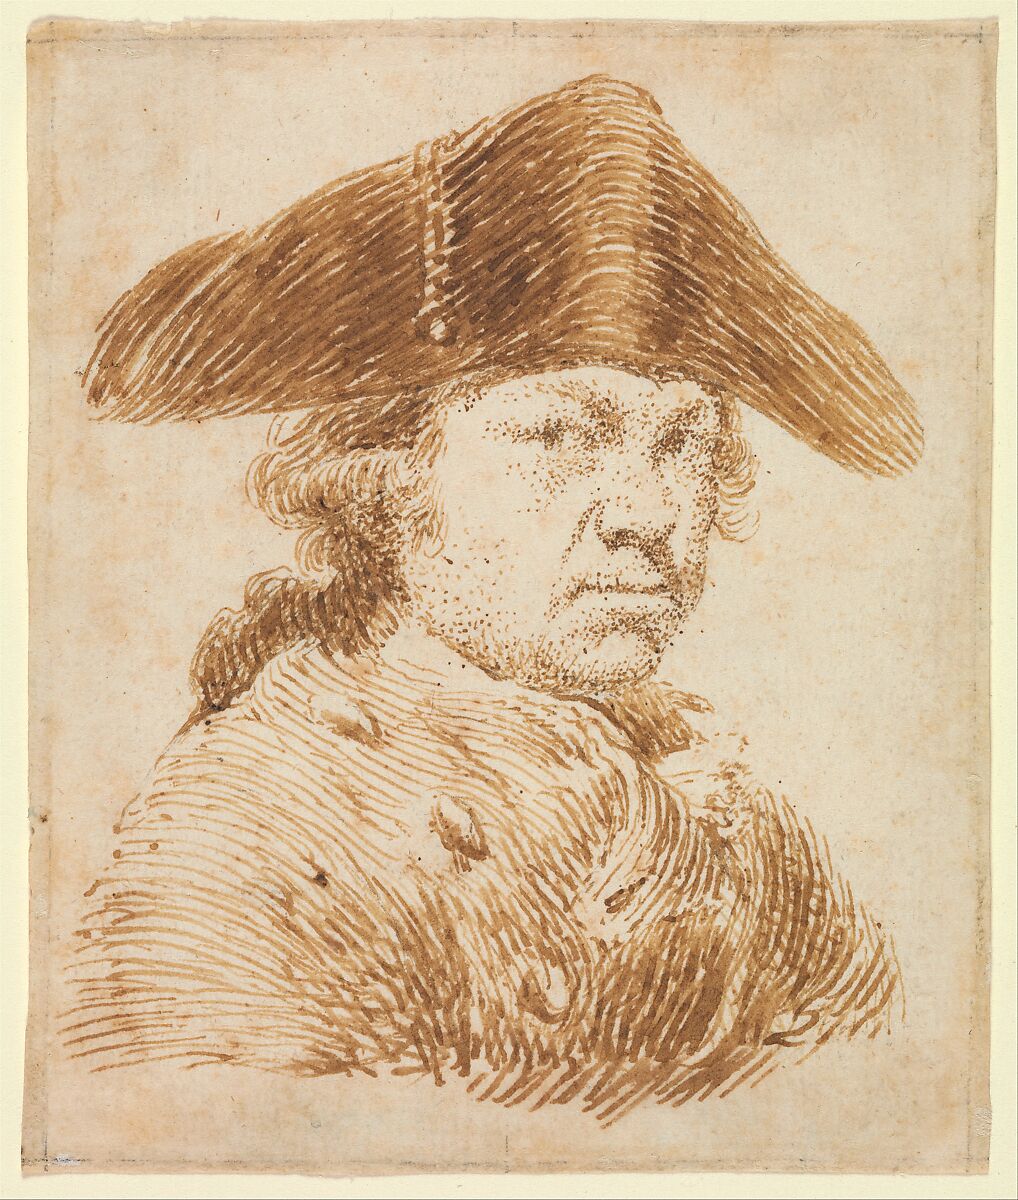 Self-Portrait in a Cocked Hat, Goya (Francisco de Goya y Lucientes) (Spanish, Fuendetodos 1746–1828 Bordeaux), Pen and brown (iron gall?) ink on paper 